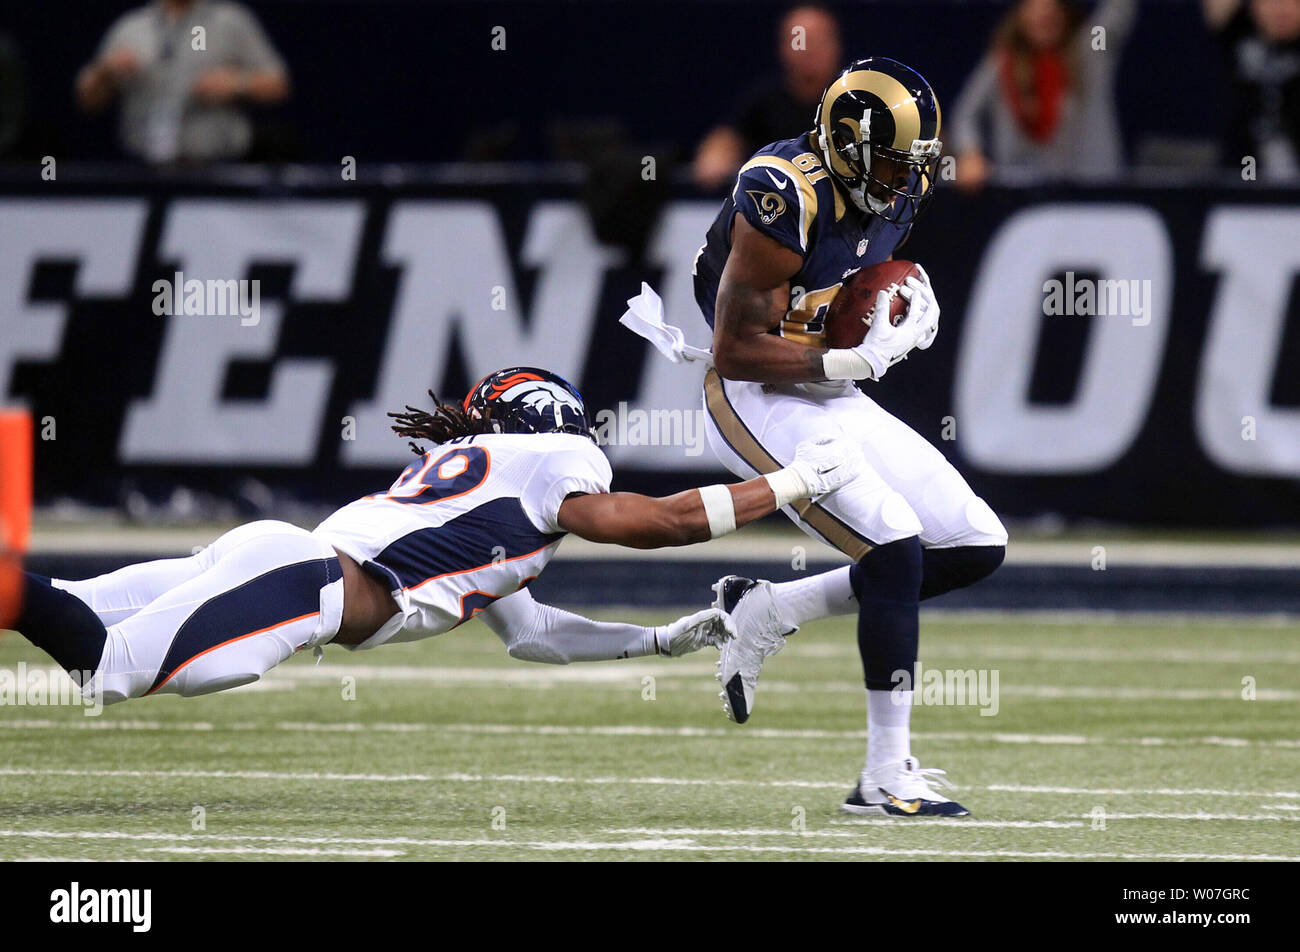 St. Louis Rams Kenny Britt catches the football in front of the diving Denver Broncos Bradley Roby for a 63 yard touchdown in the first quarter at the Edward Jones Dome in St. Louis on November 16, 2014. UPI/Bill Greenblatt Stock Photo